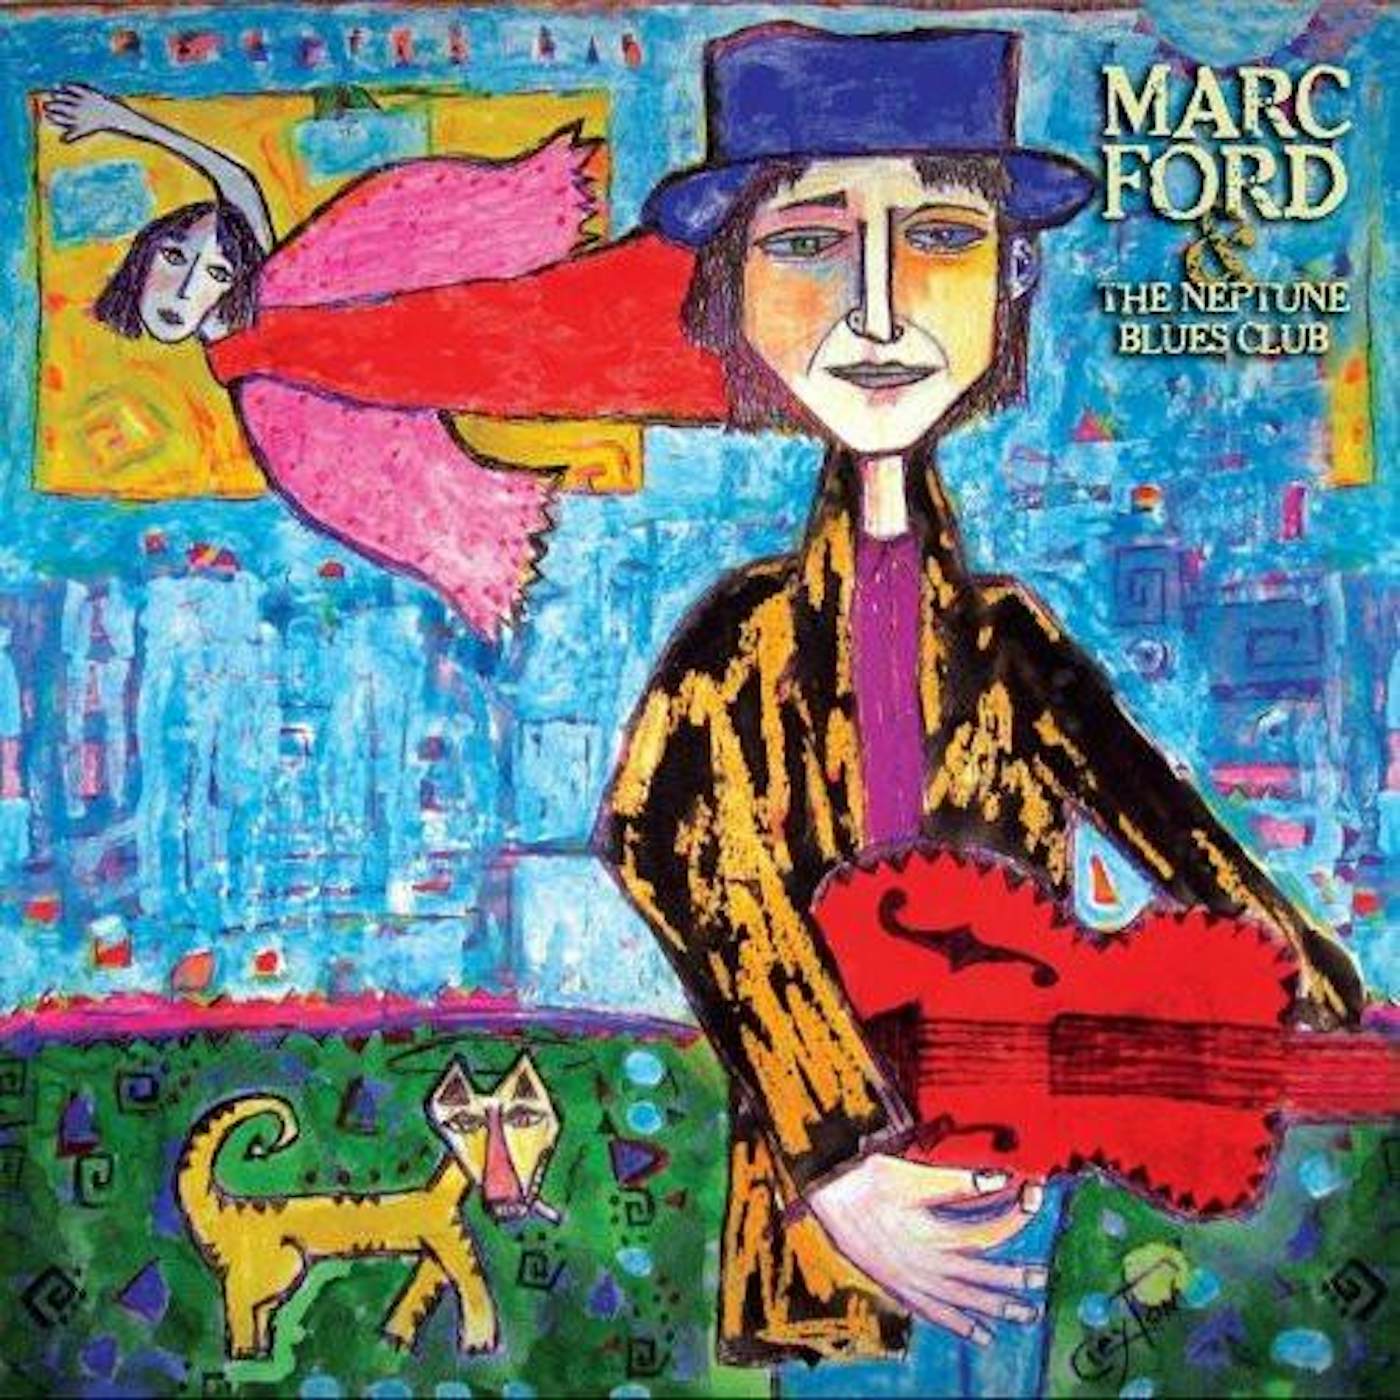 MARC FORD & THE NEPTUNE BLUES CLUB CD